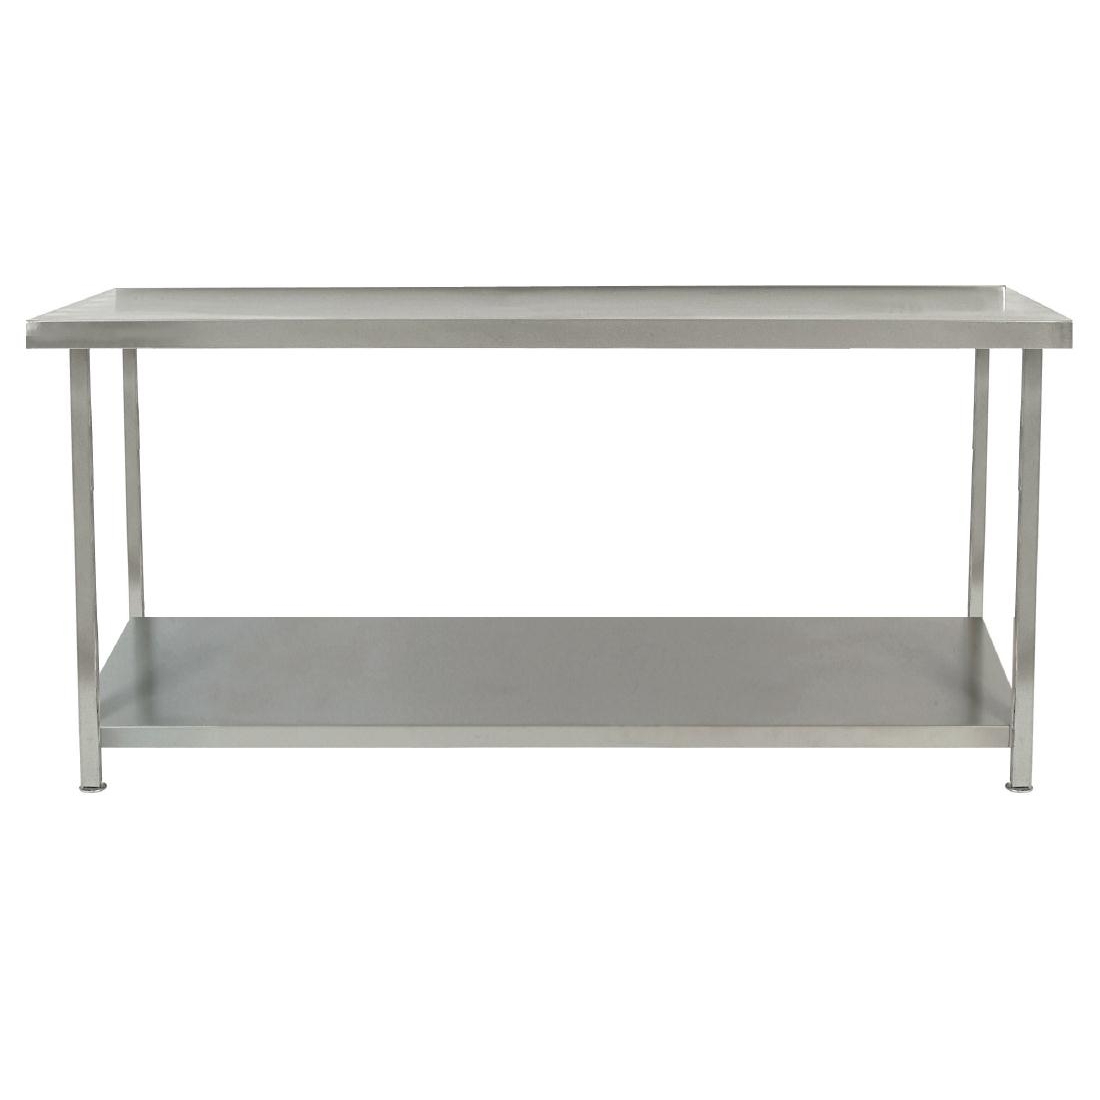 Parry Fully Welded Stainless Steel Wall Table with Undershelf 1200x600mm